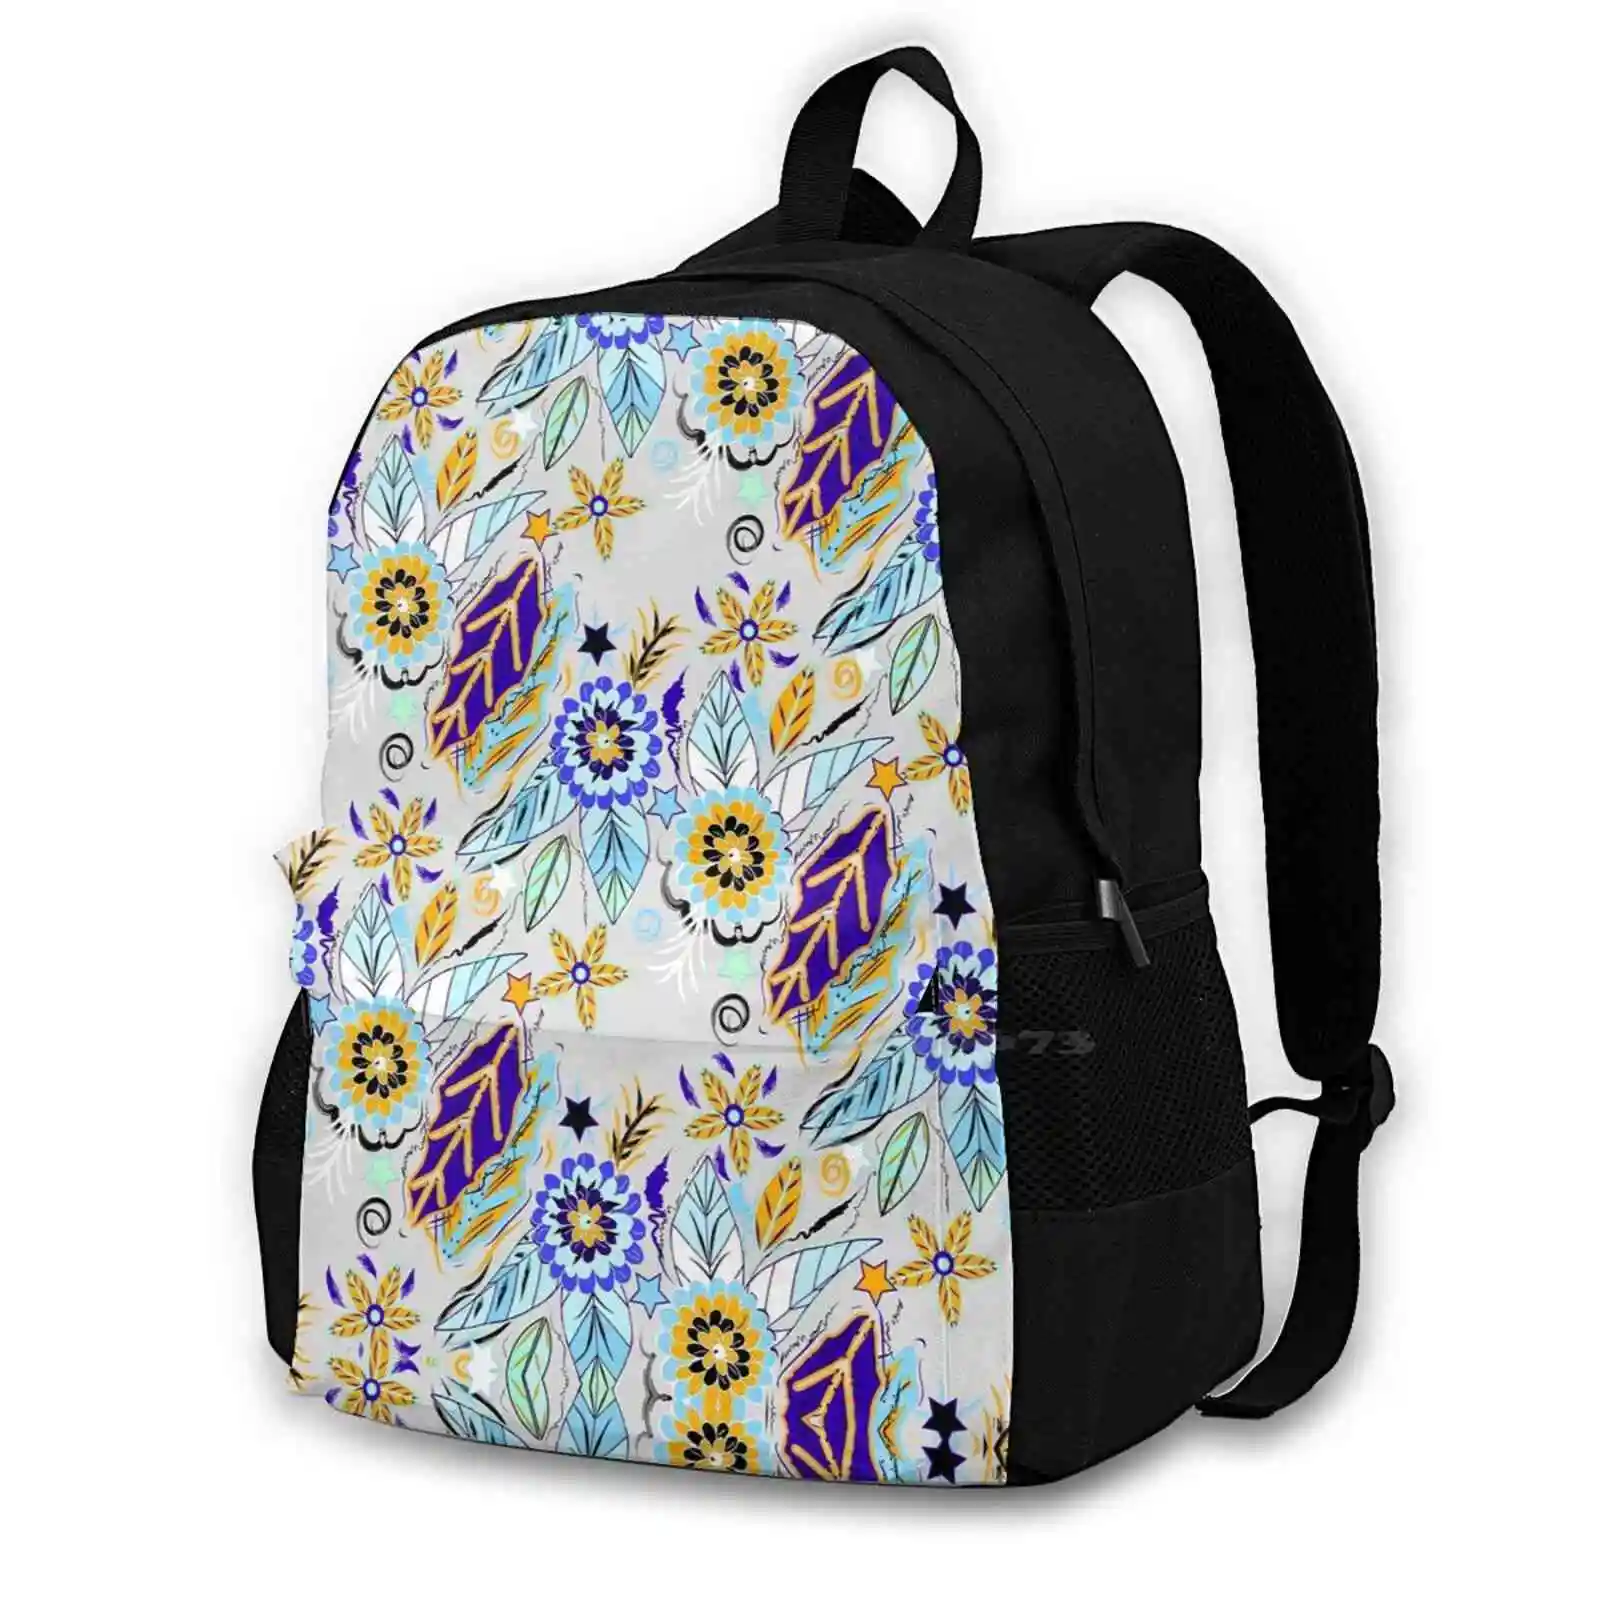 

Spring Flowers Fashion Travel Laptop School Backpack Bag Floral Flower Hibiscus Bloom Tropical Pattern Patterns Petals Texture